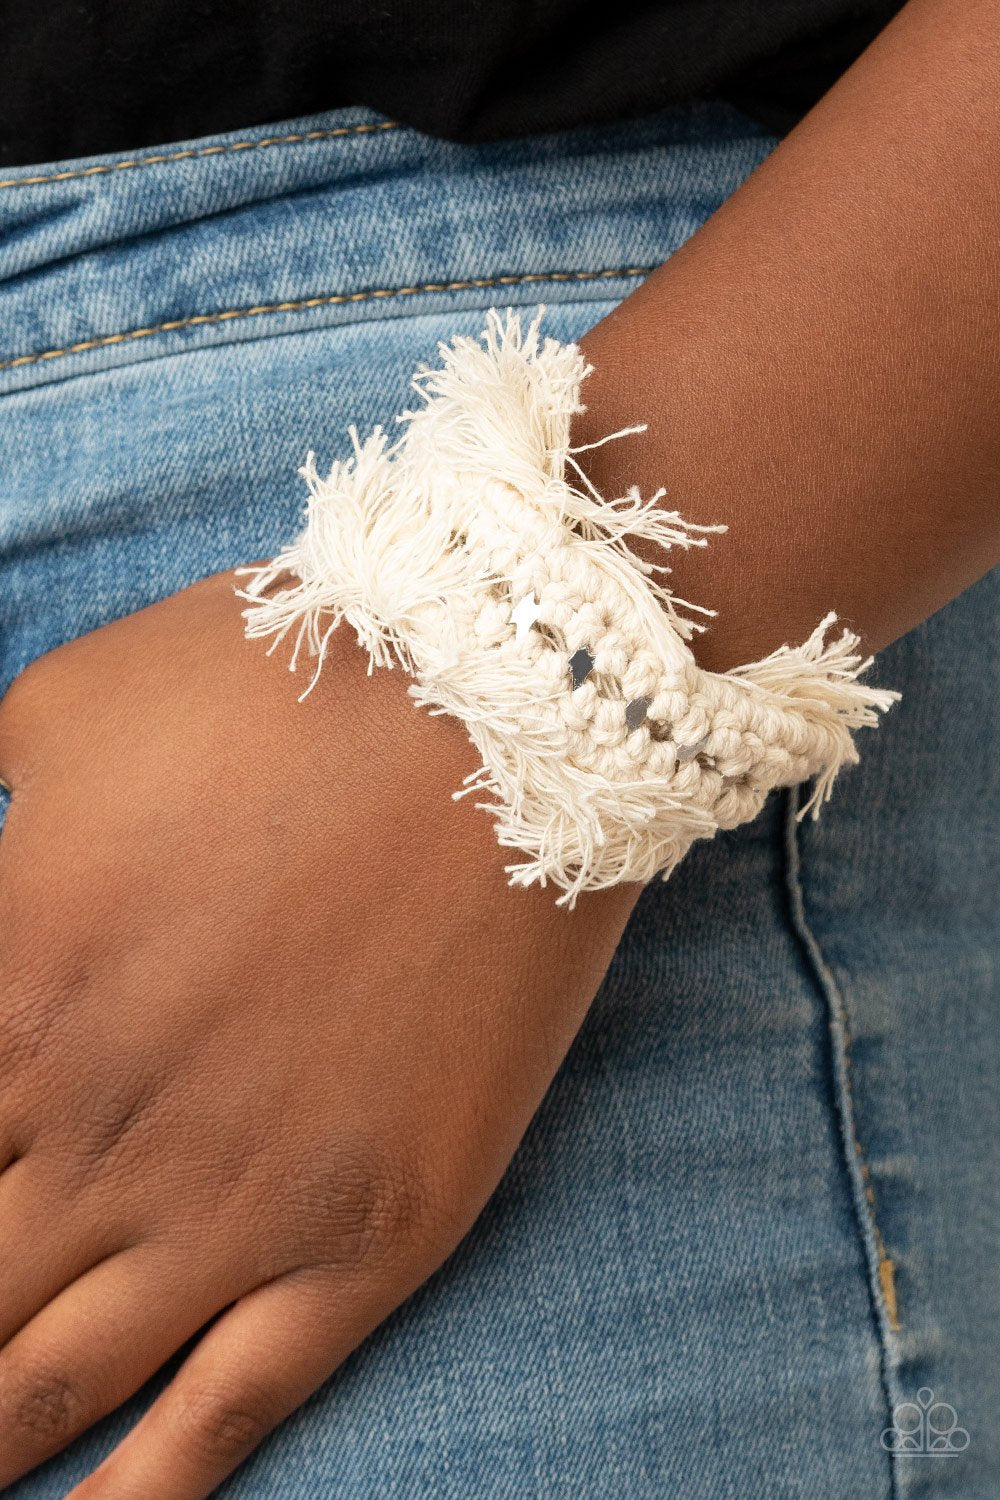 &lt;p&gt;Twine-like thread decoratively knots around an airy silver cuff, creating a macramé inspired fringe around the wrist.&lt;/p&gt;
&lt;p&gt;&lt;i&gt; Sold as one individual bracelet.&lt;/i&gt;&lt;/p&gt;